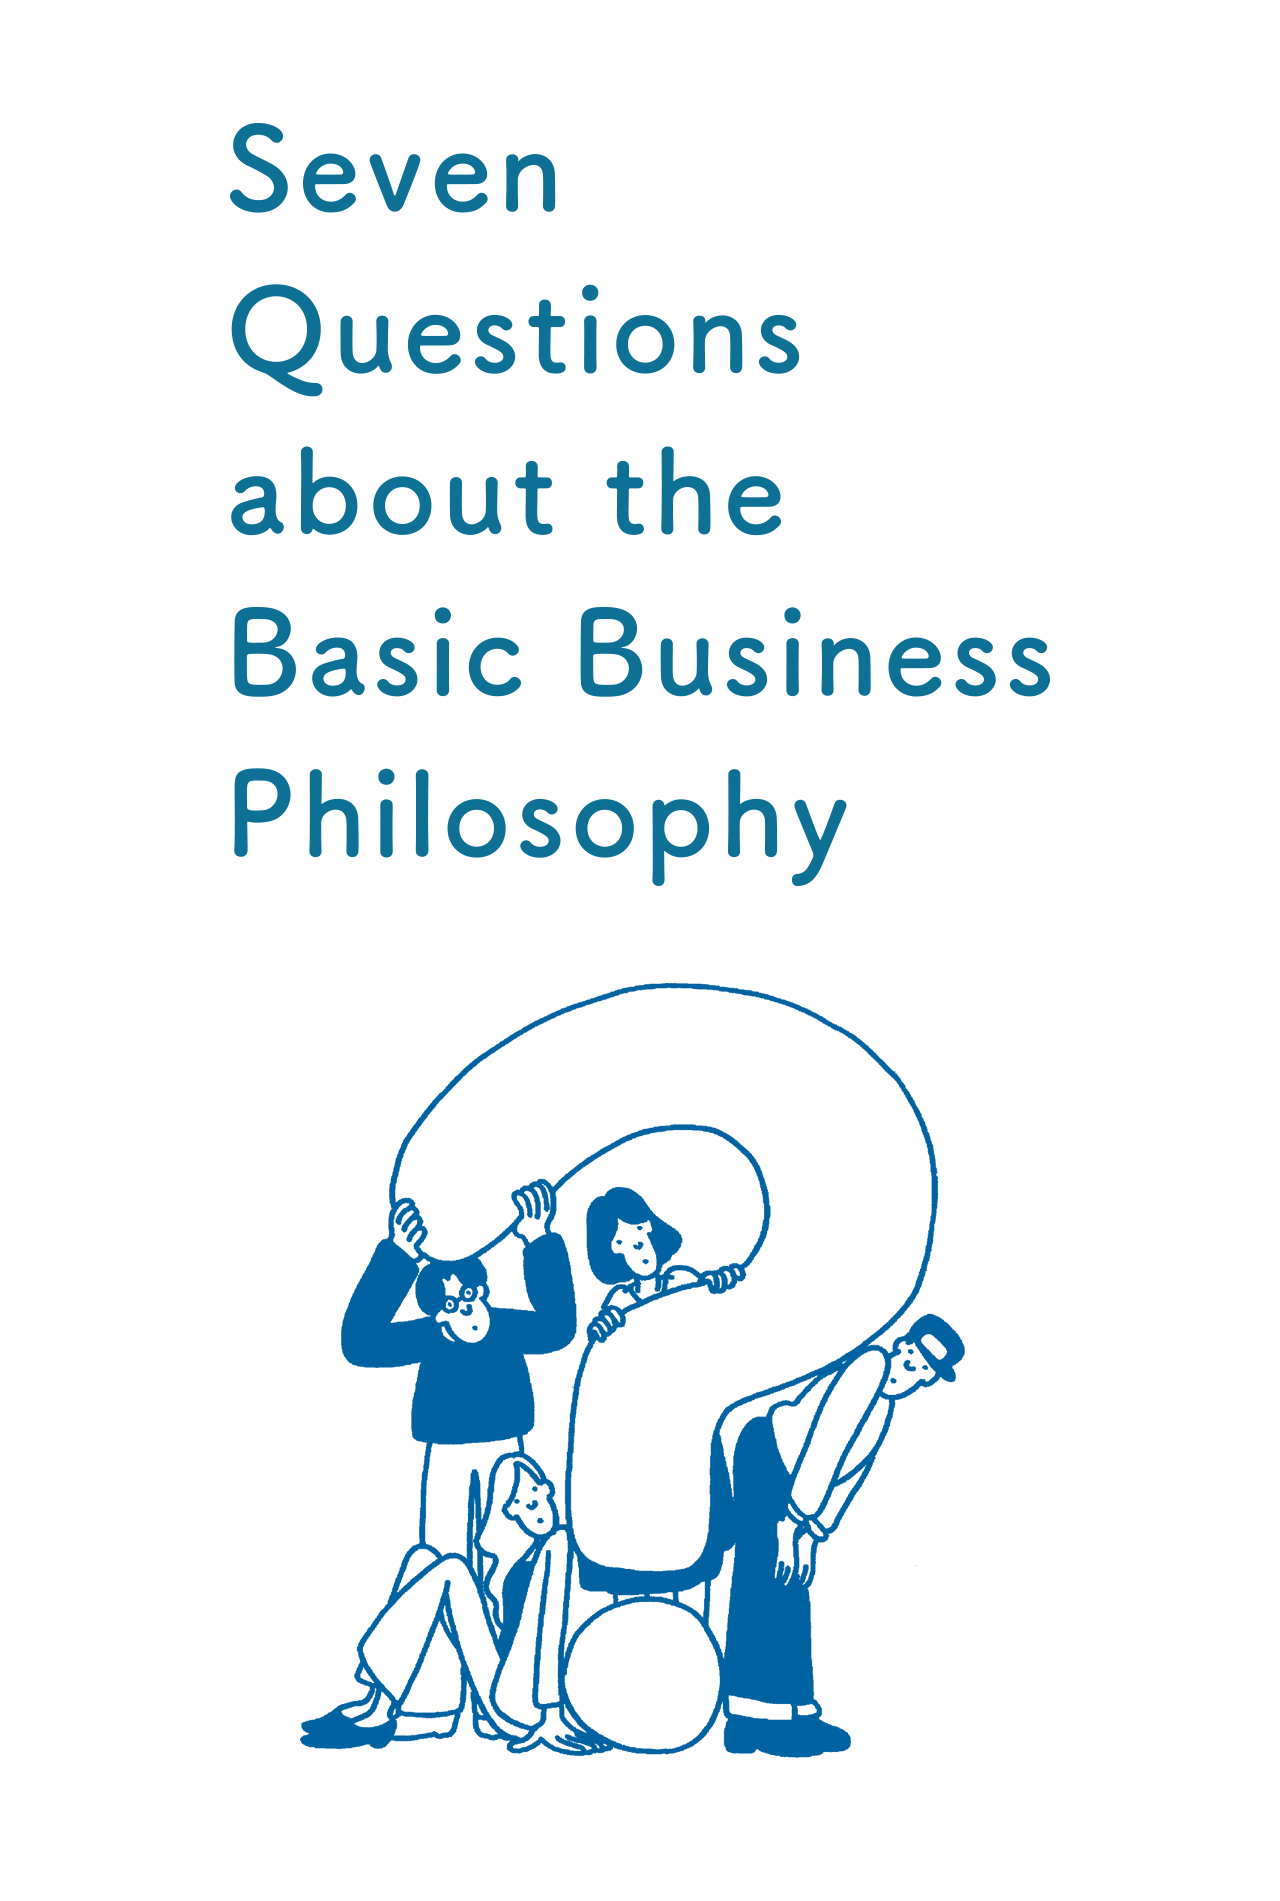 Seven Questions about the Basic Business Philosophy